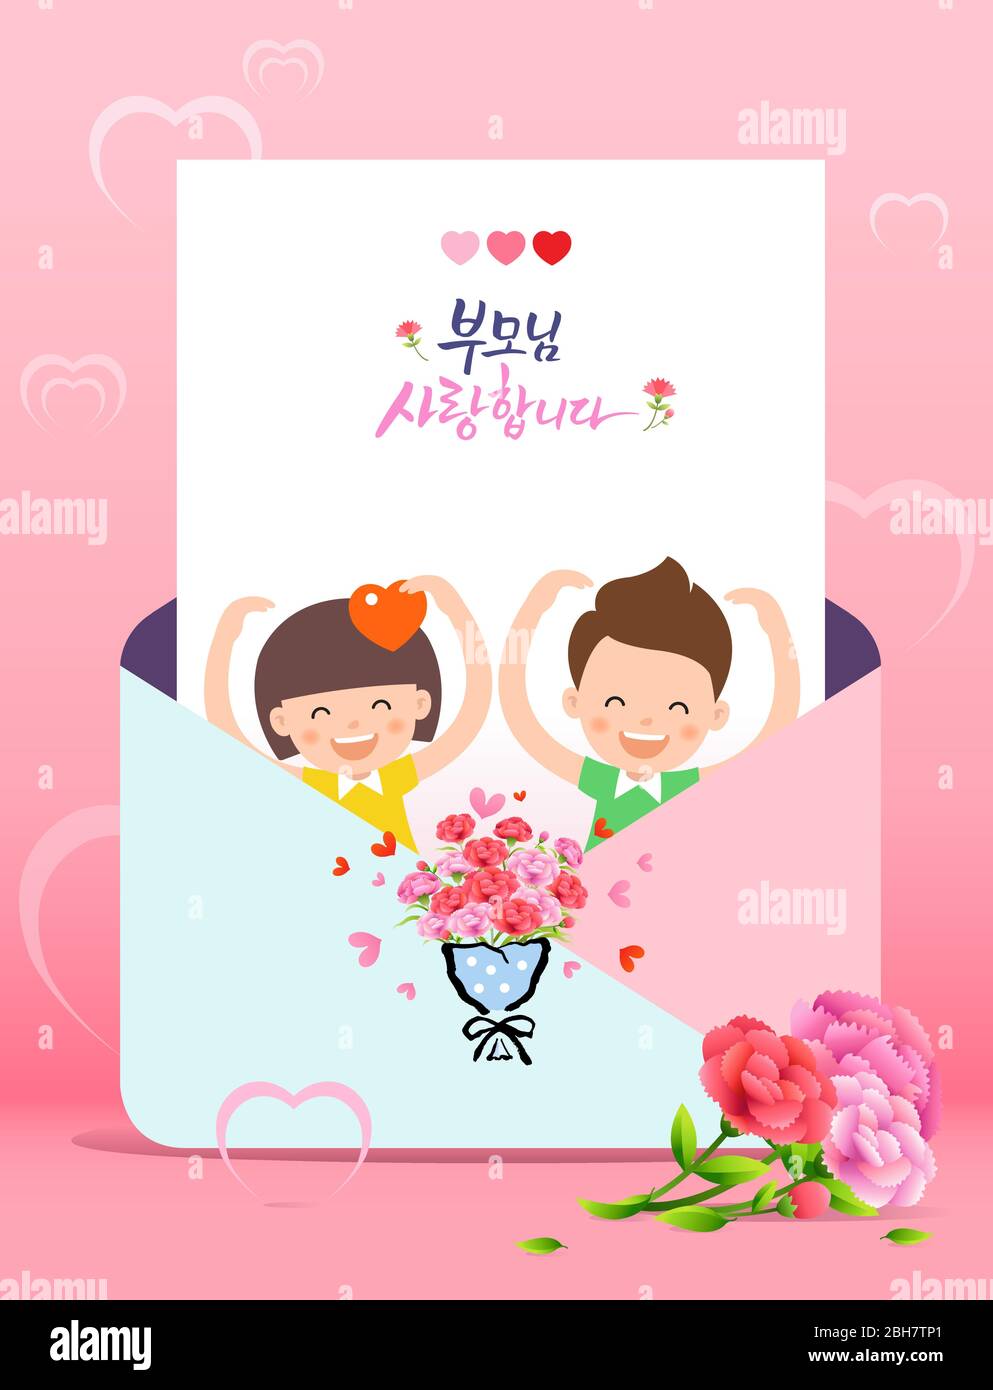 Parents day greeting card. Cute children celebrate with a carnation bouquet. Parents, I love you, Korean translation. Stock Vector